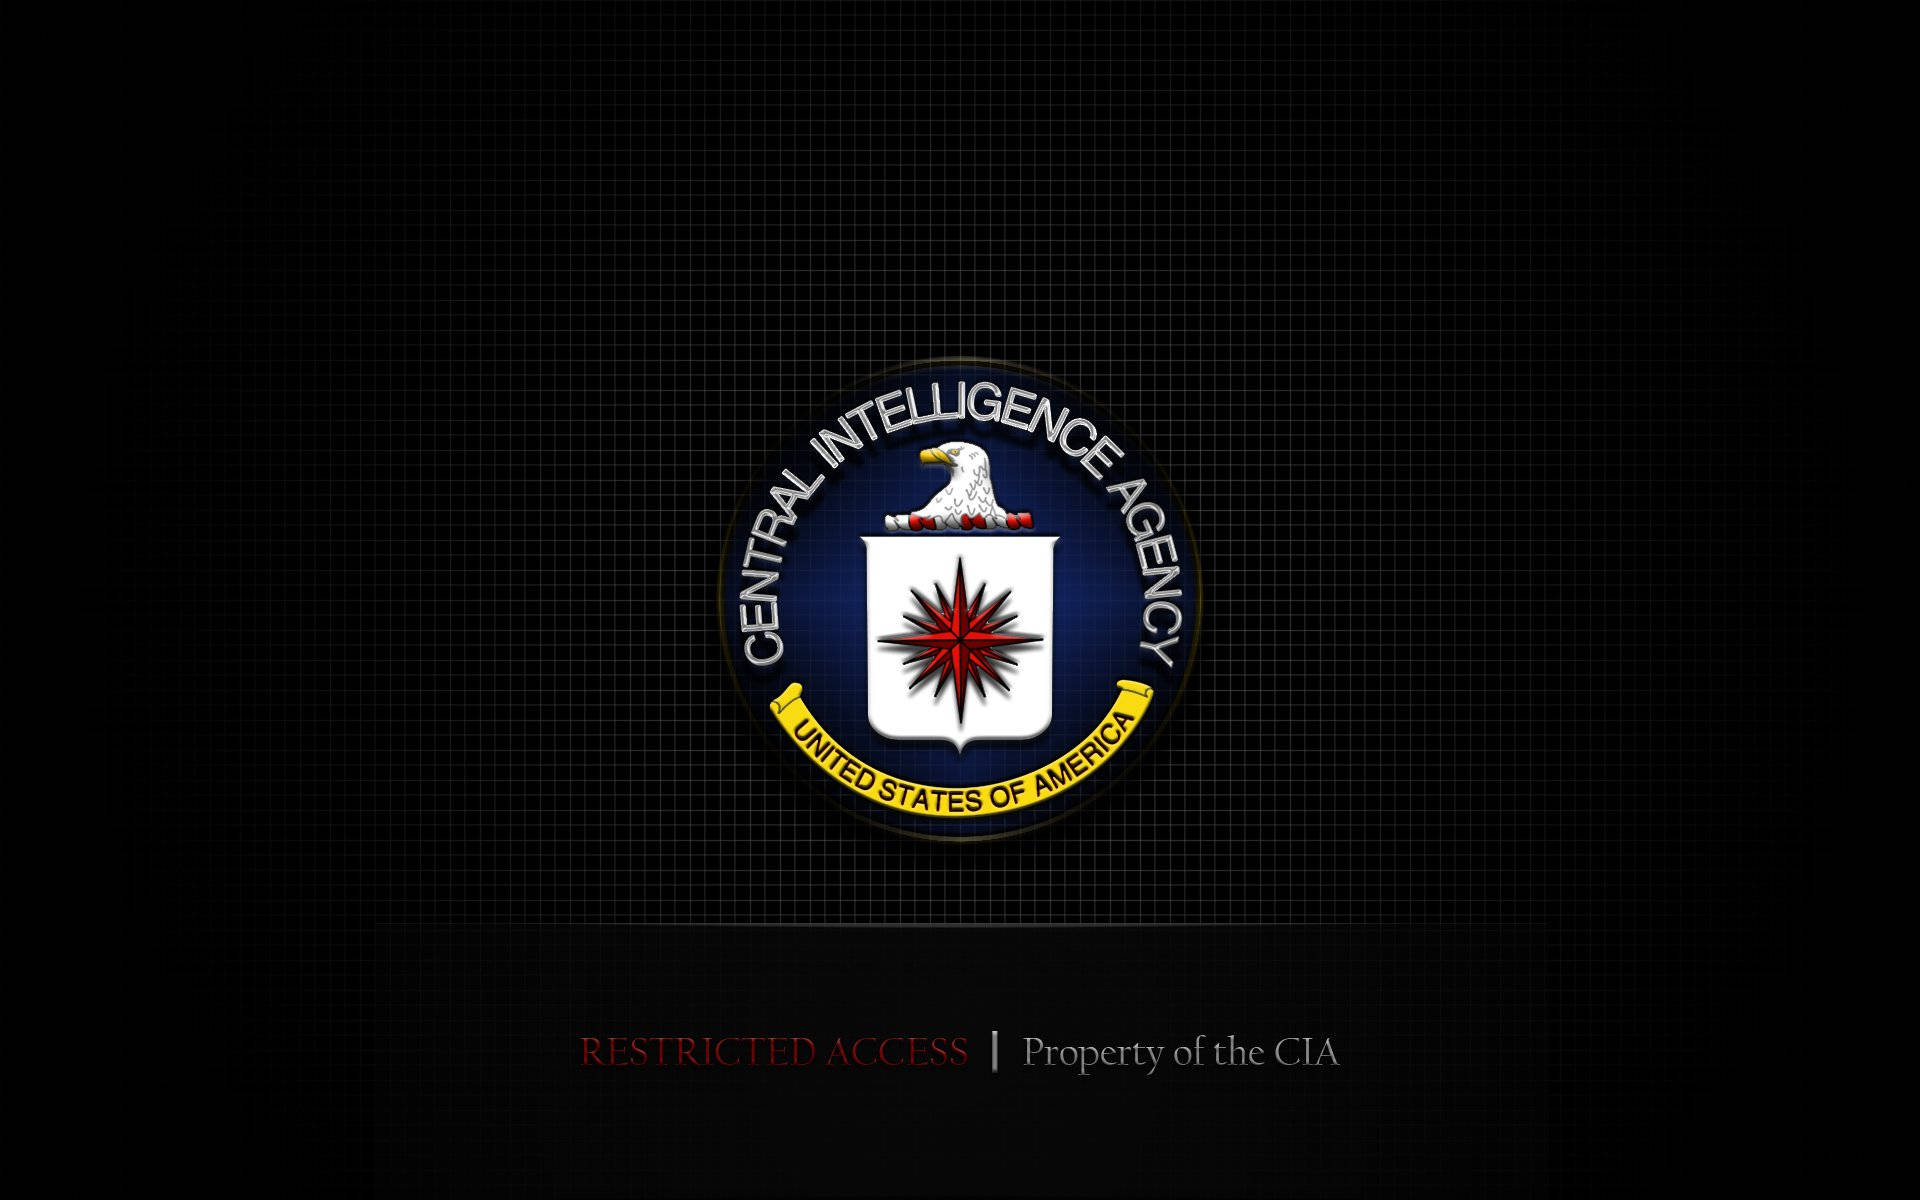 Cia Logo Restricted Access Wallpaper